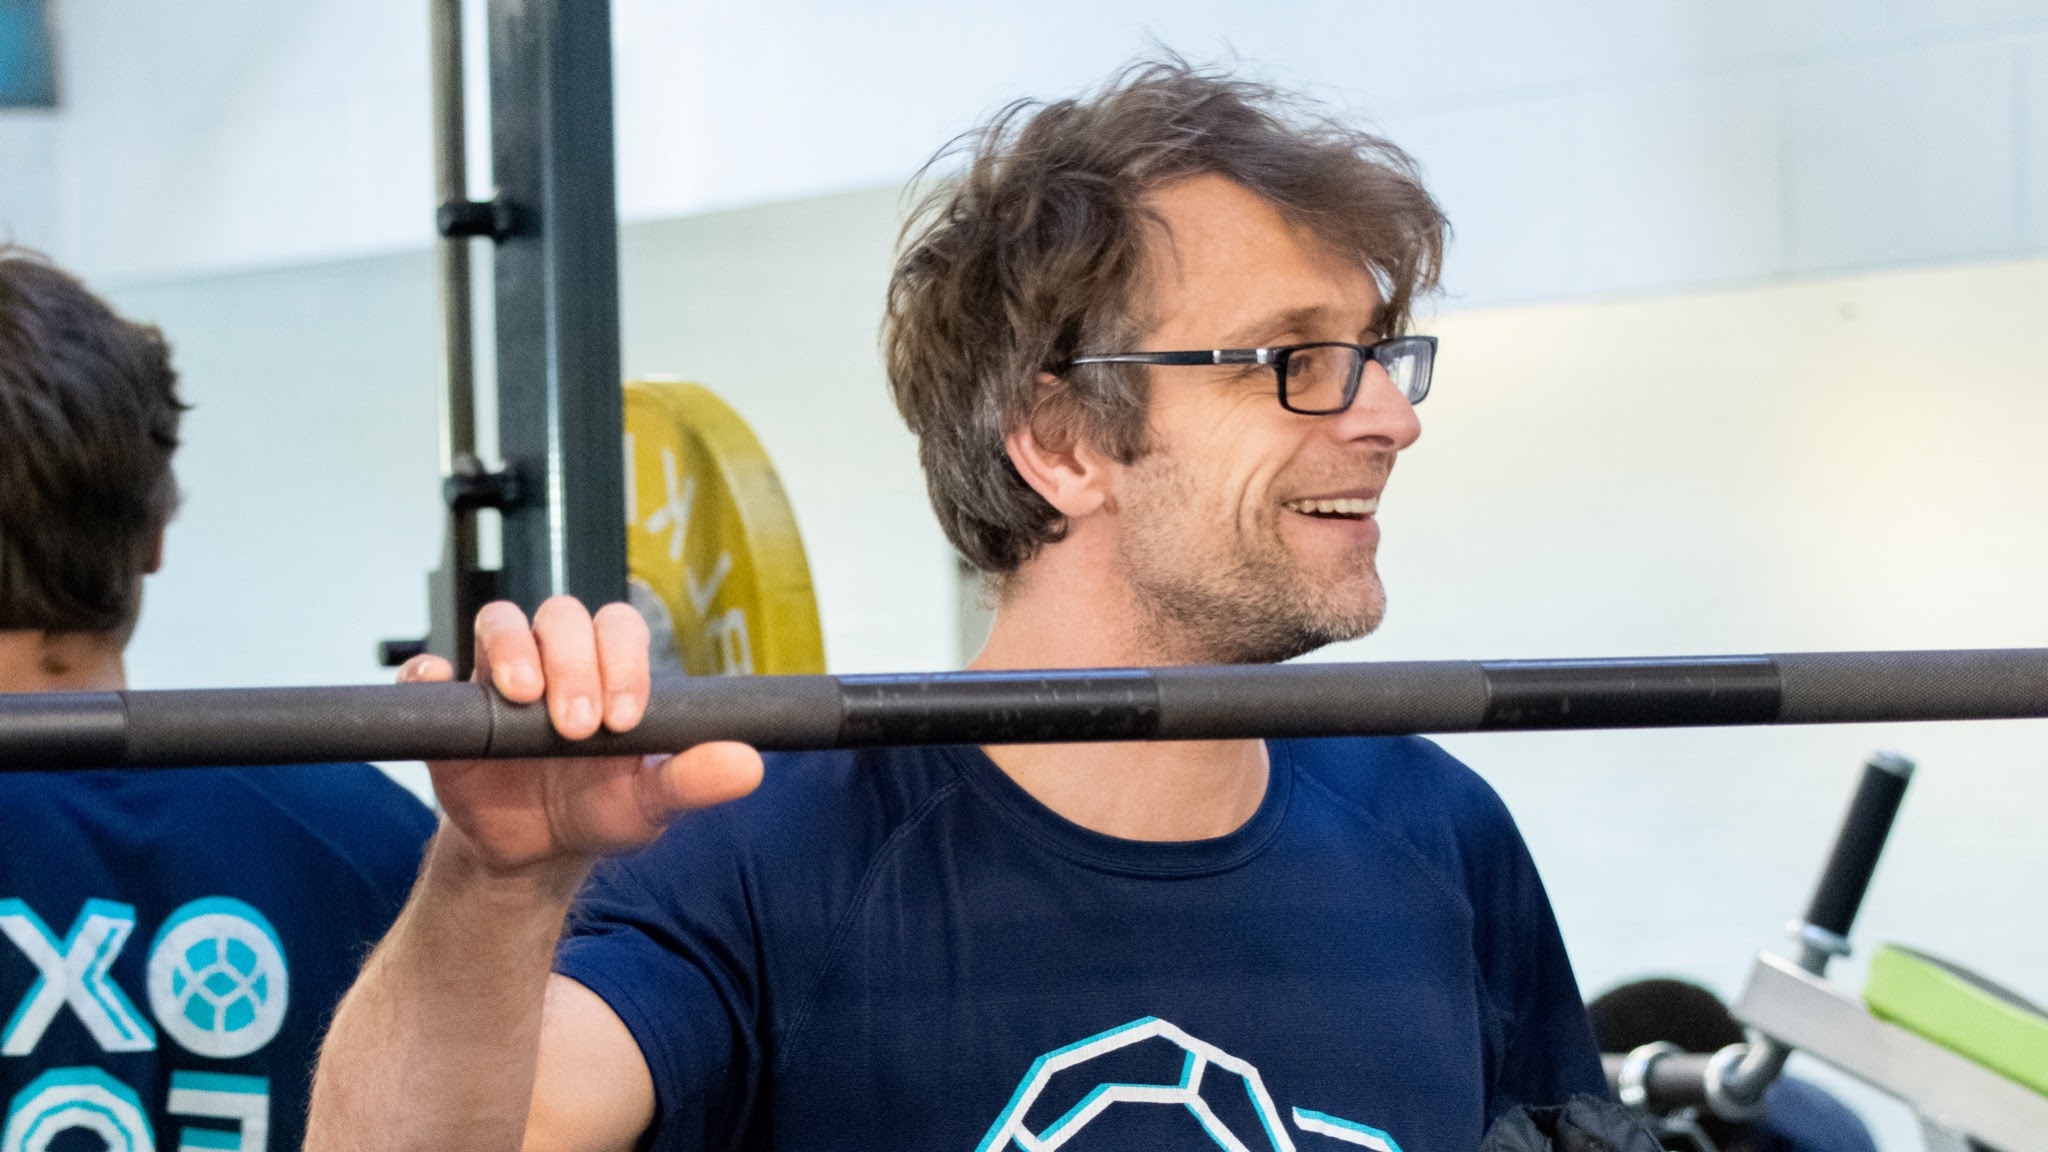 One year on, Weightlifting with Friedreich’s Ataxia